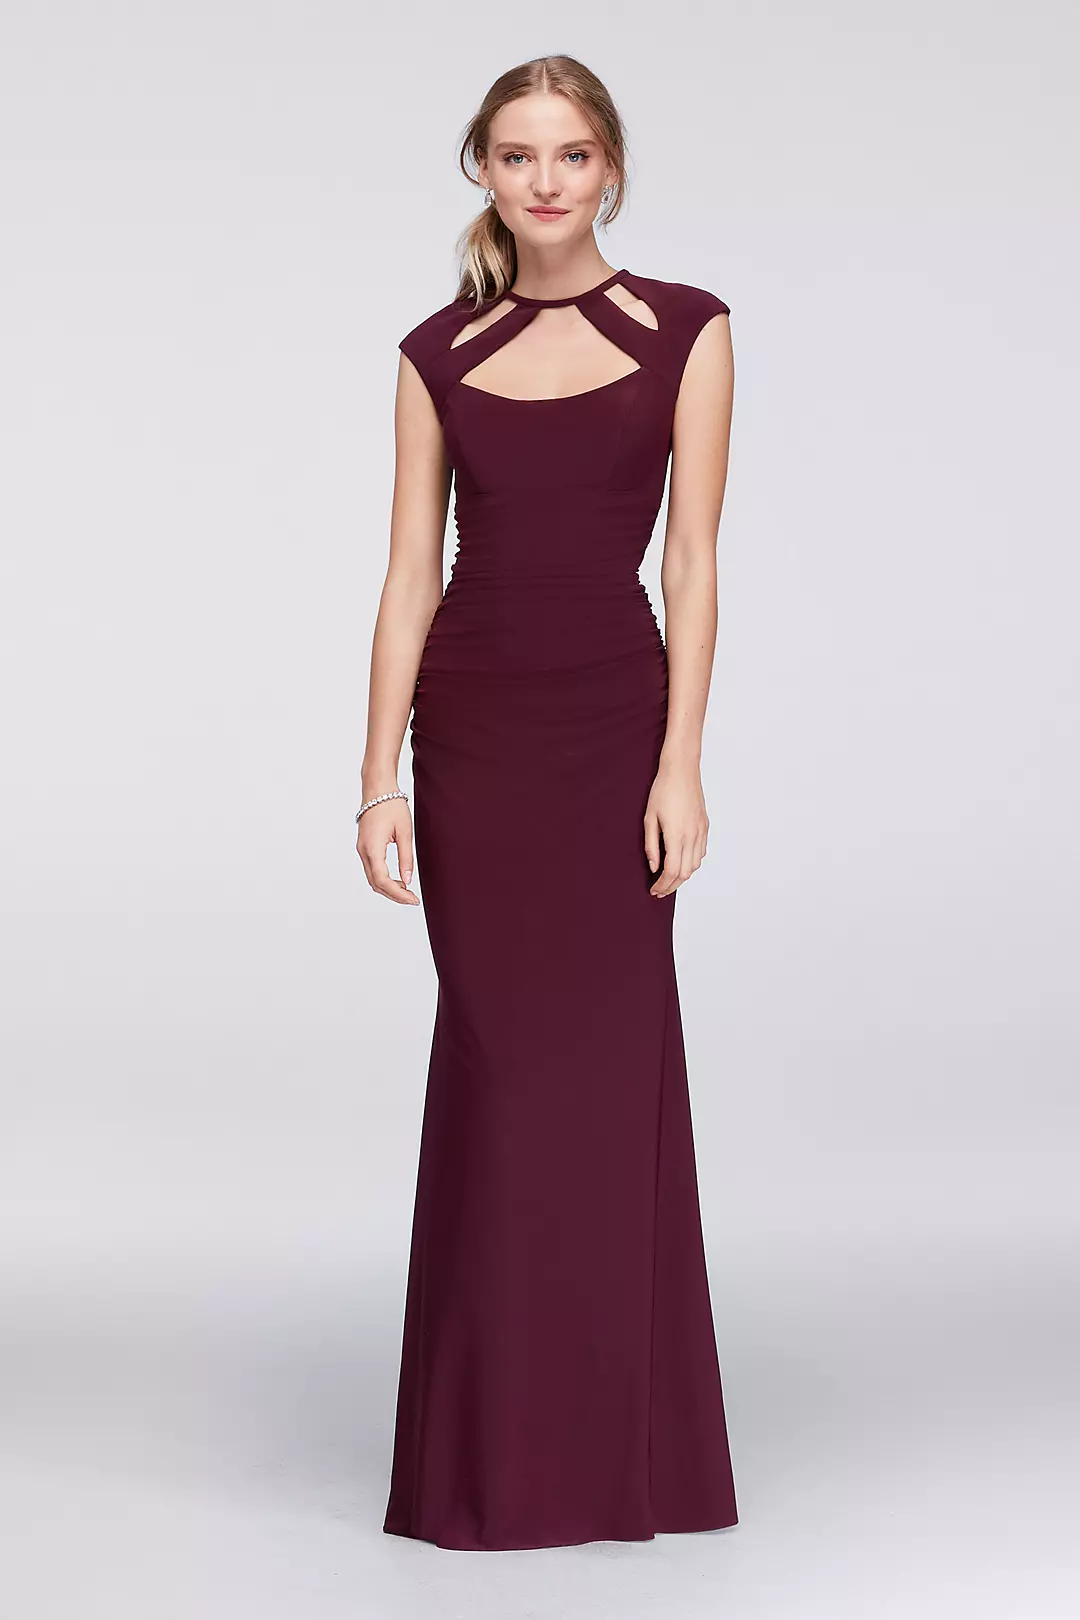 Ruched Sheath Dress With Cutout Neckline Image